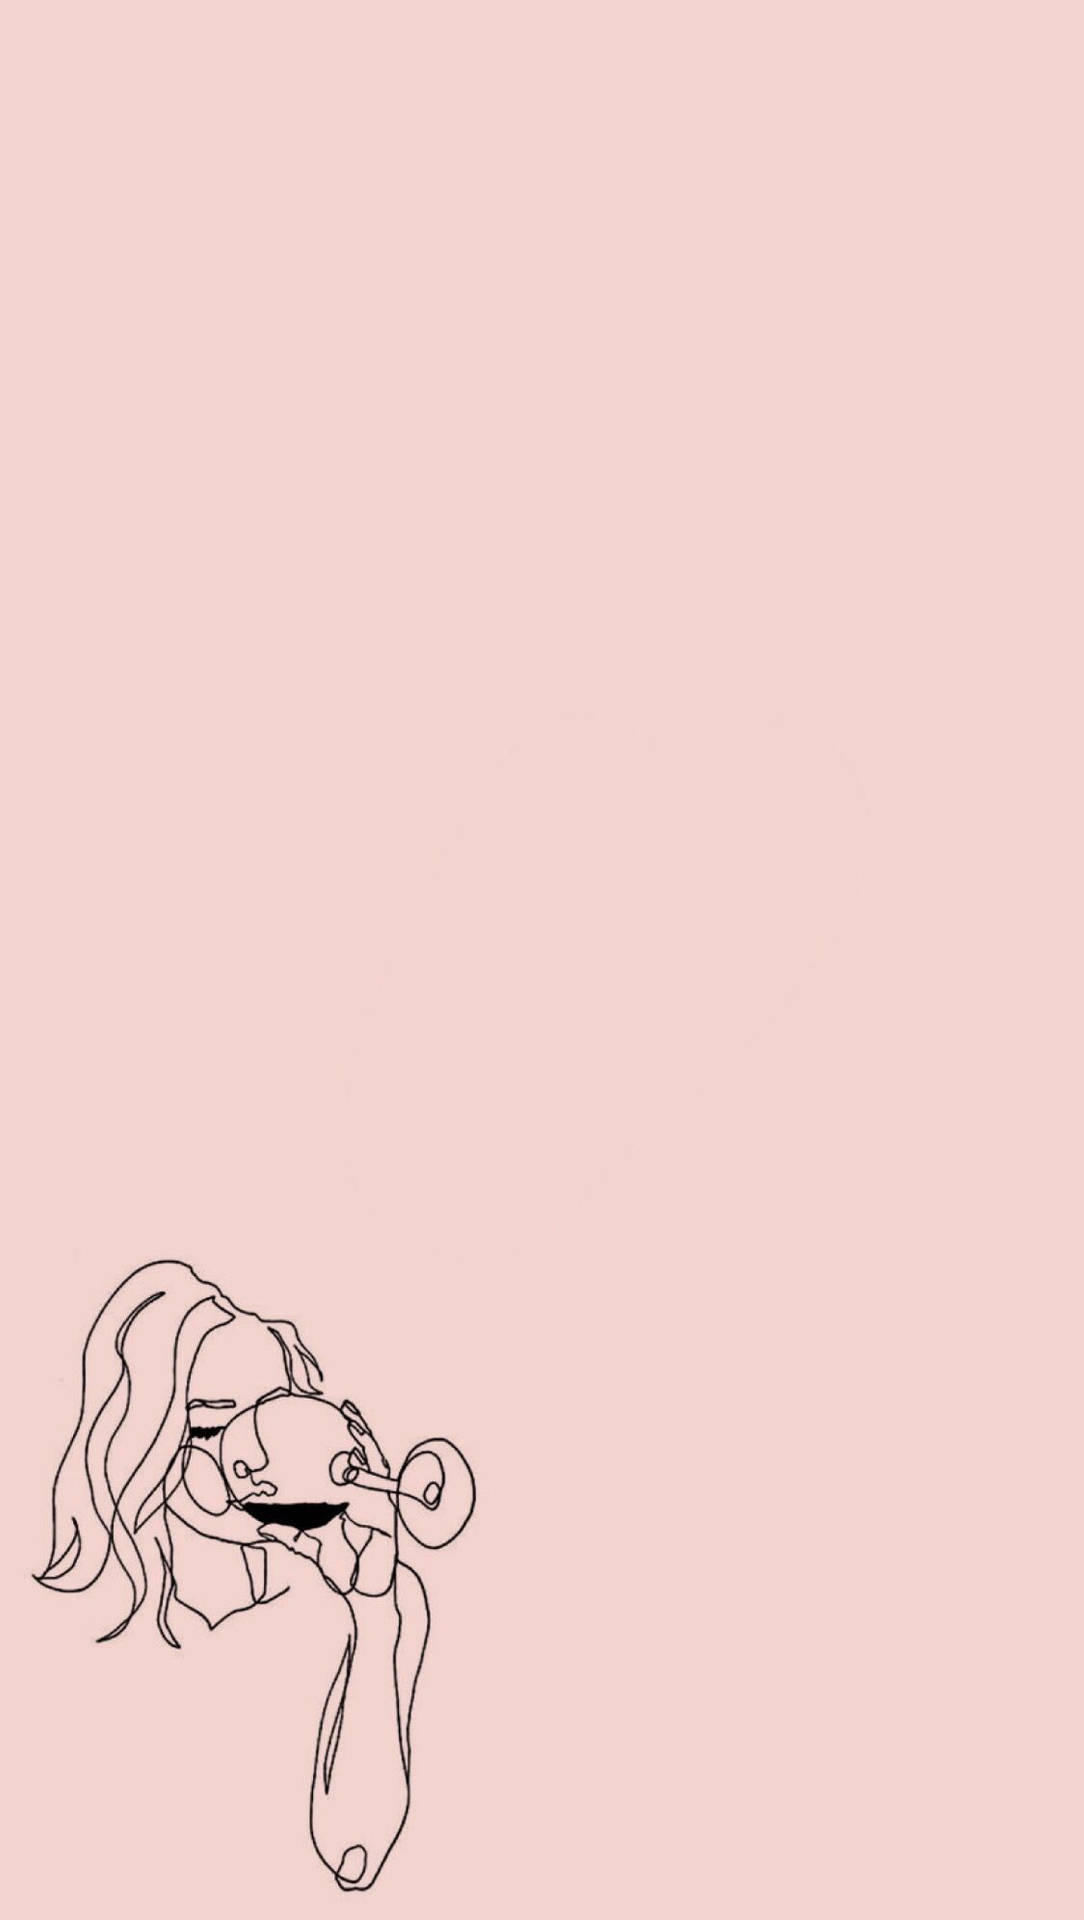 One Line Drawing Woman Drinking Wine Wallpaper